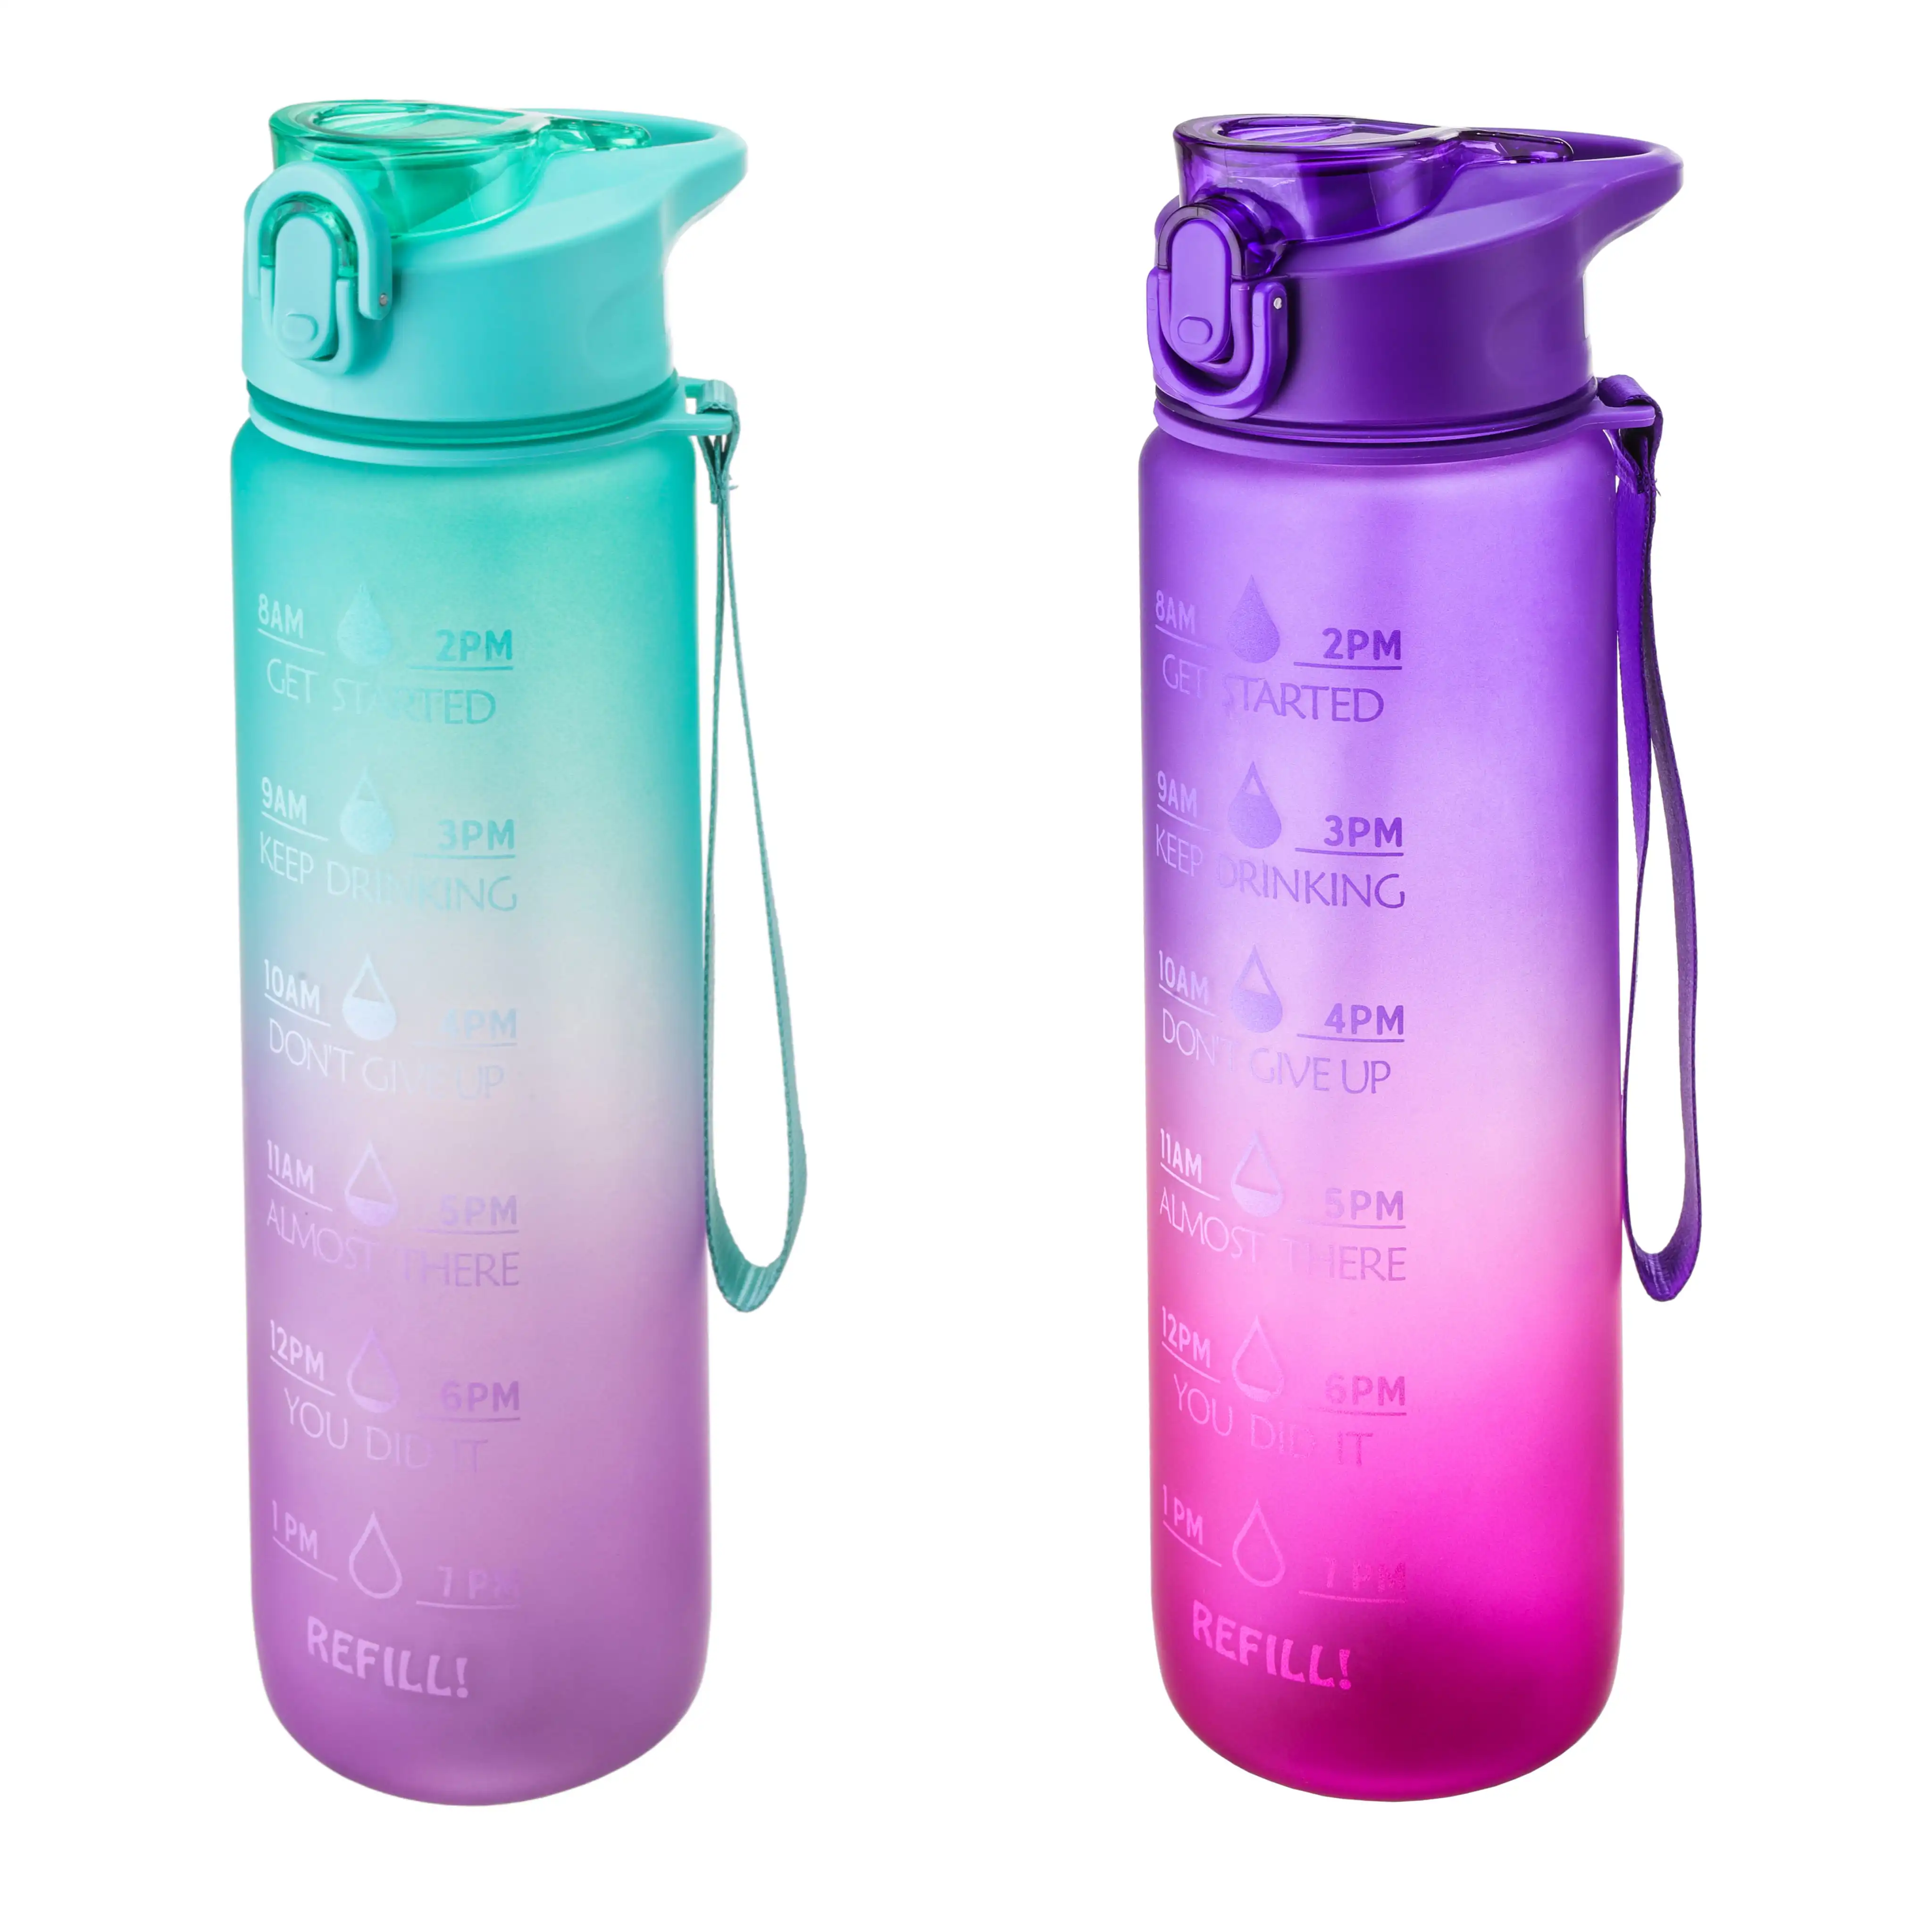 BPA Free Plastic 1L 32 oz Straw Strainer Filter Water Adults Climbing Outdoor Travel Drinking Bottle With Time Marker